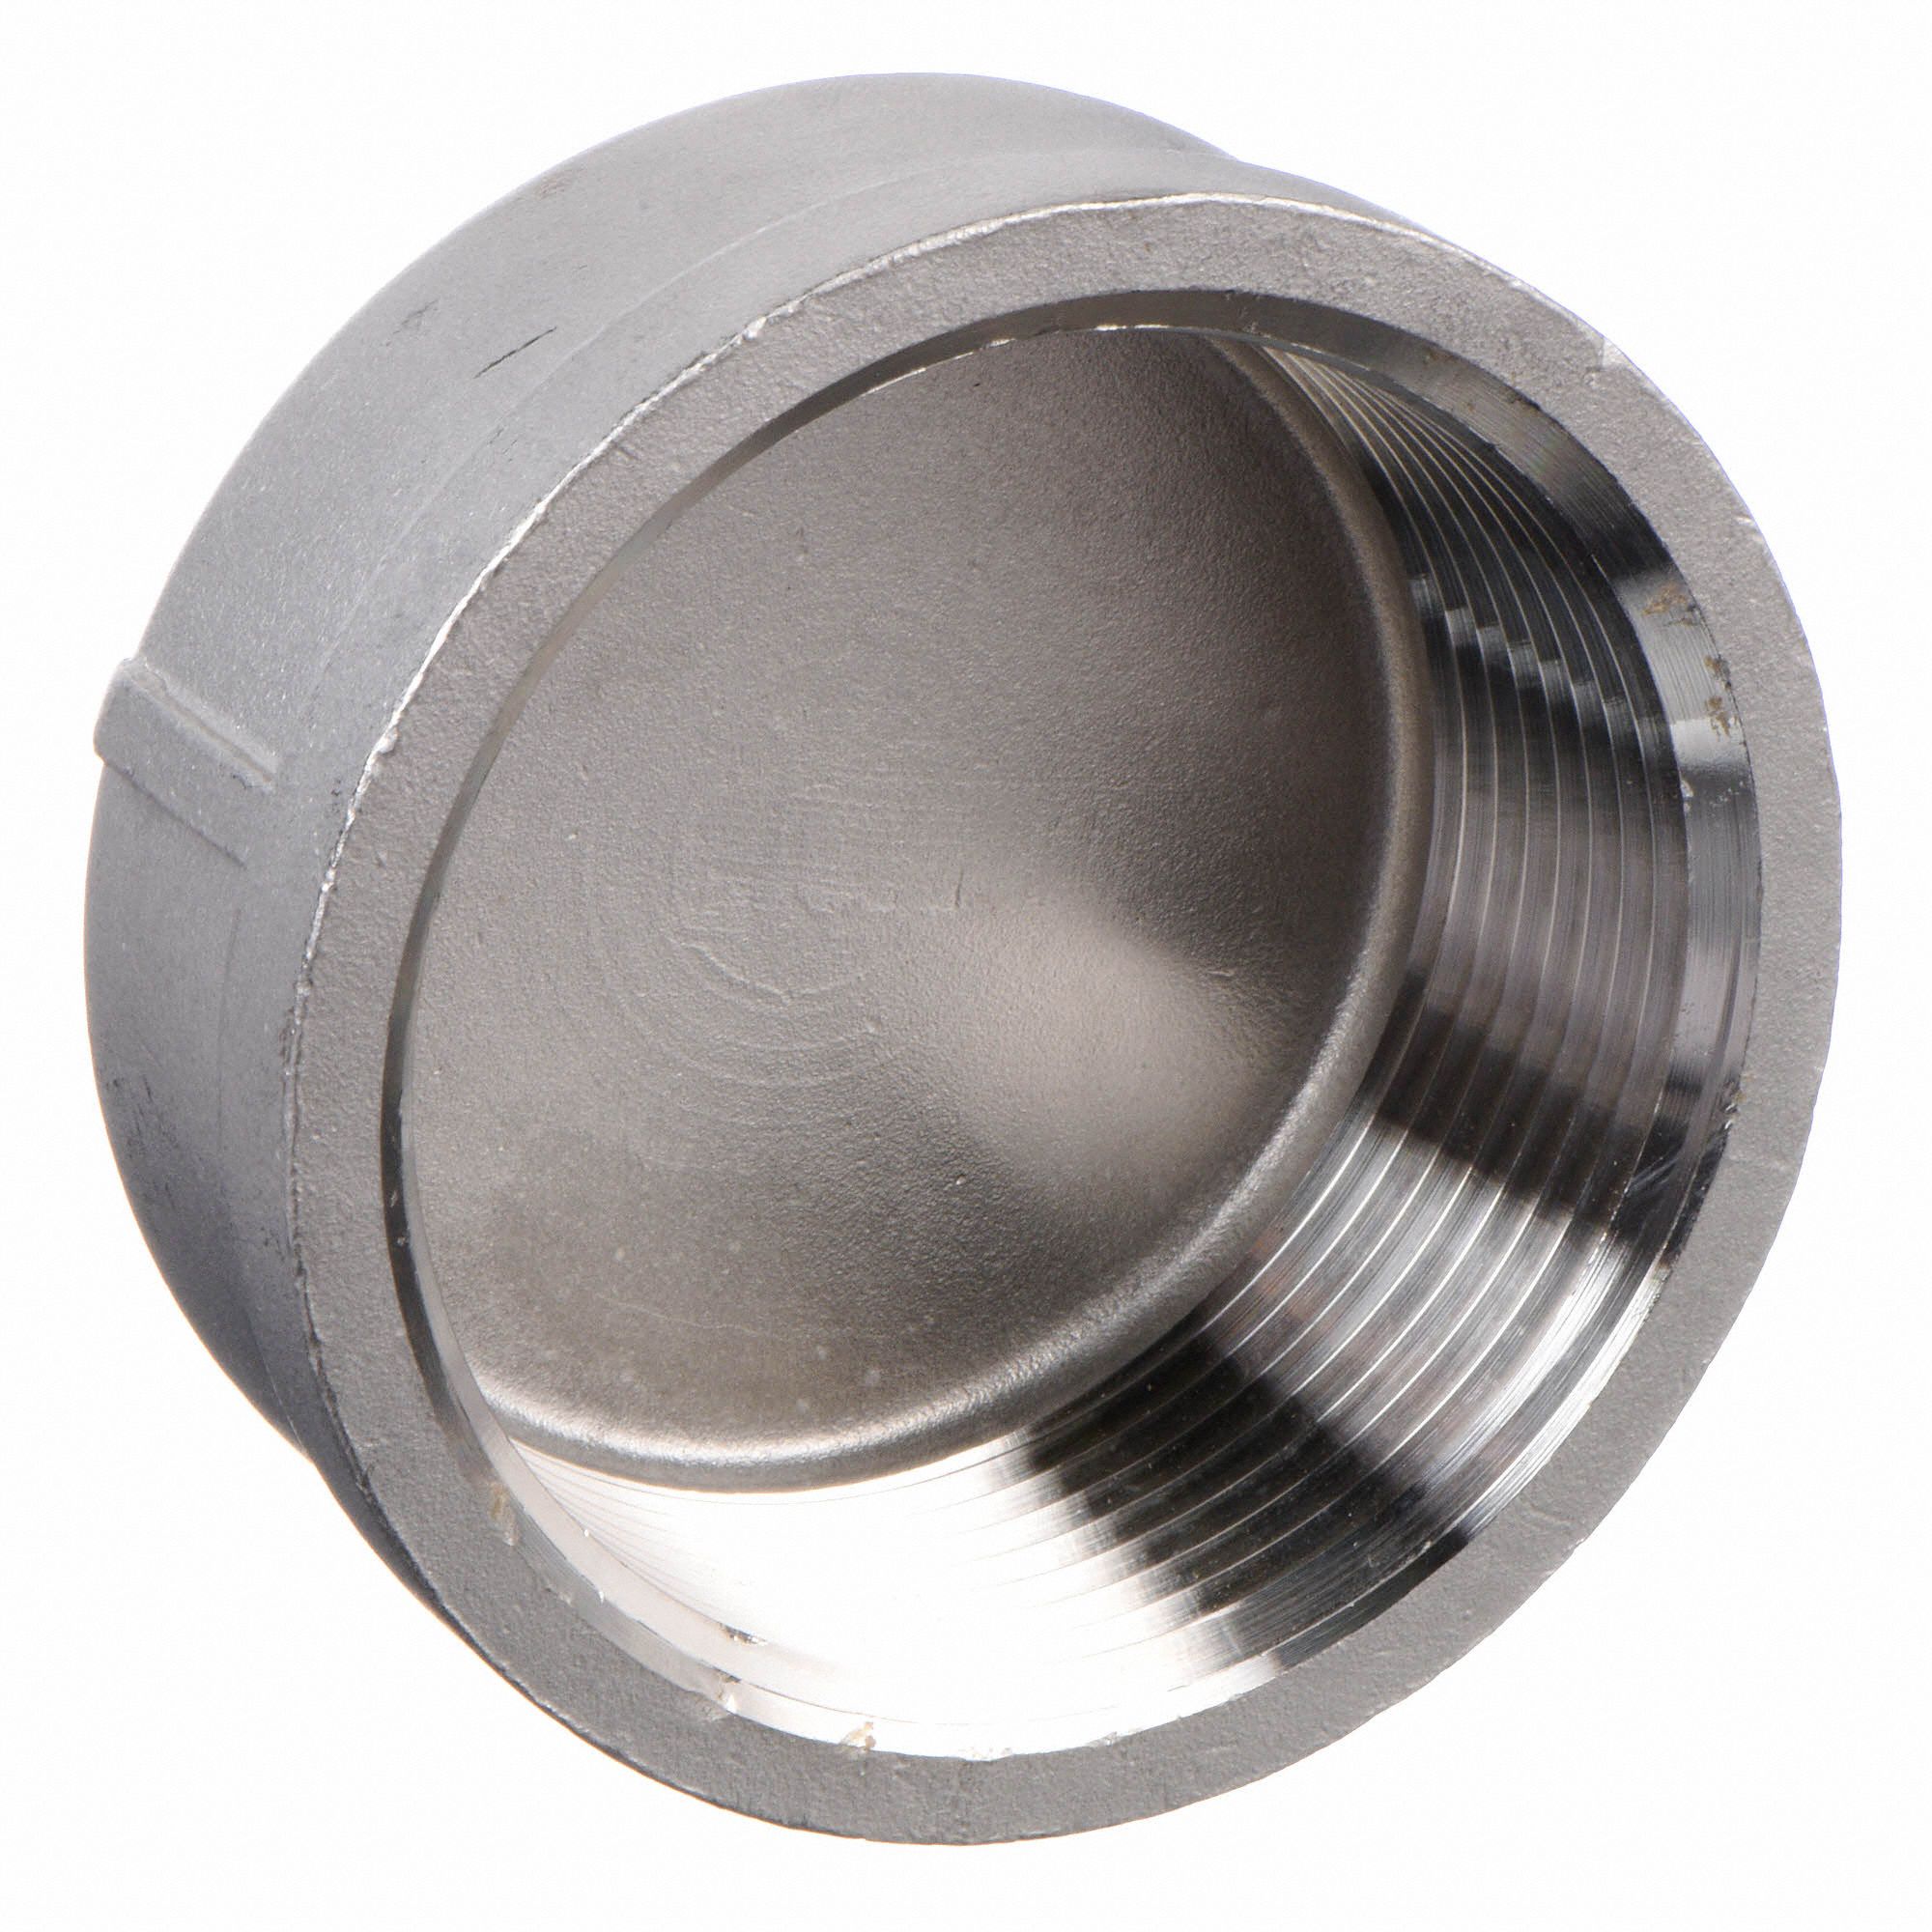 GRAINGER APPROVED 316 Stainless Steel Cap, FNPT, 2-1/2 in Pipe Size